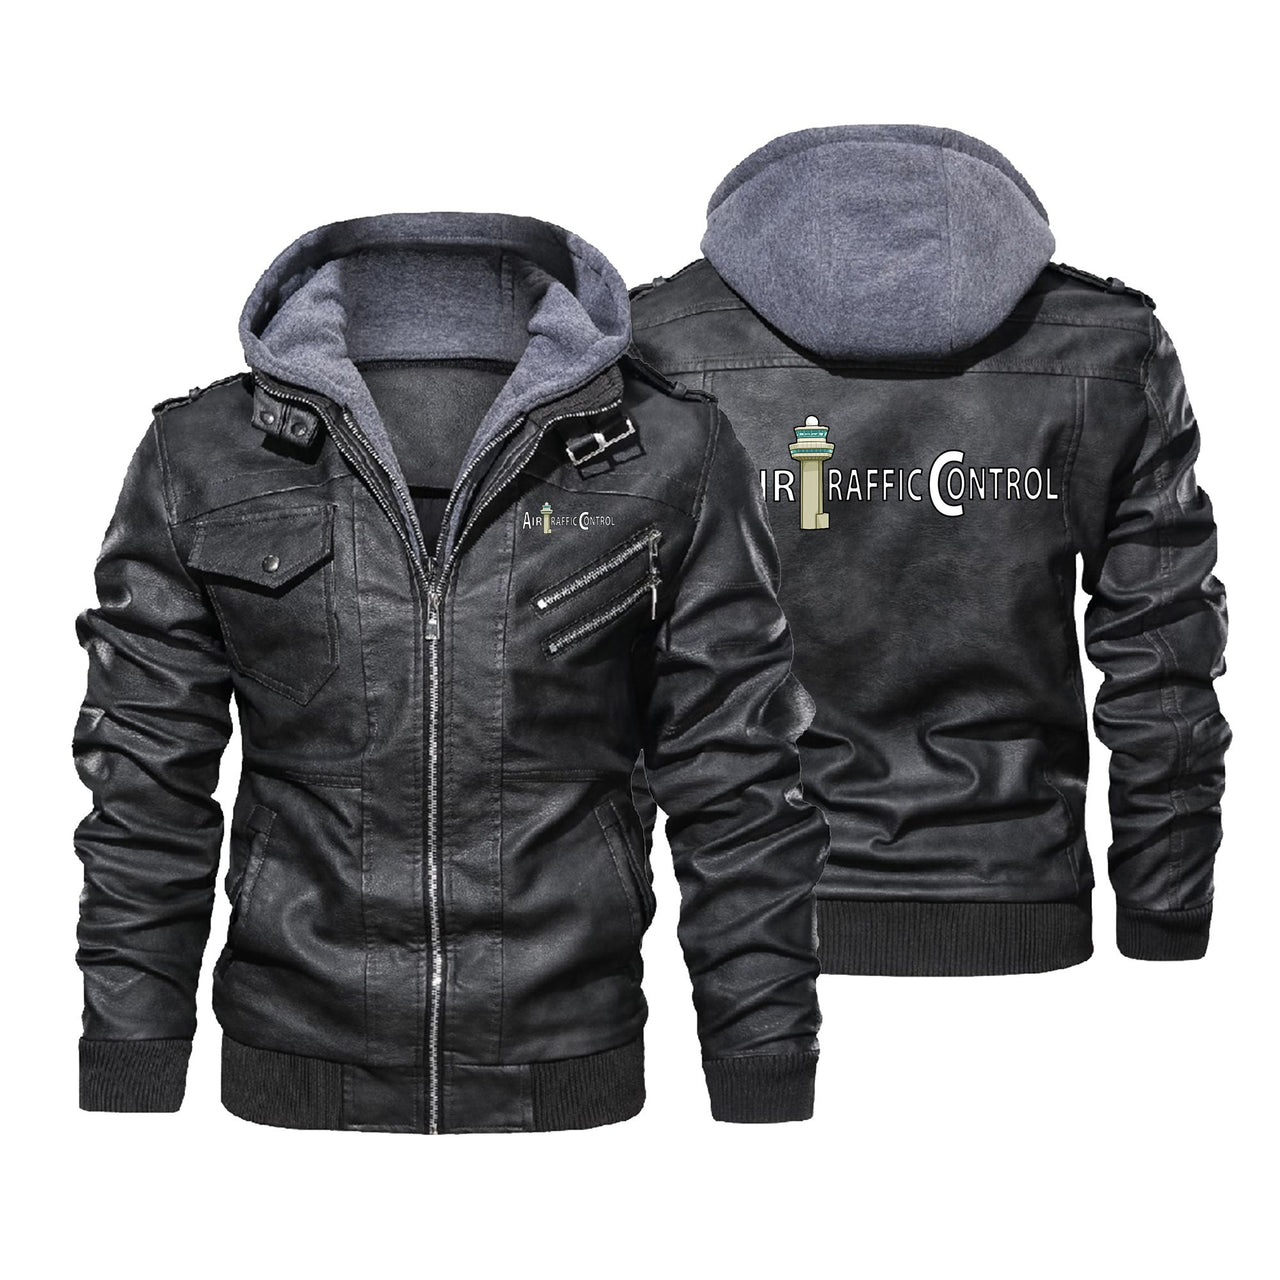 Air Traffic Control Designed Hooded Leather Jackets